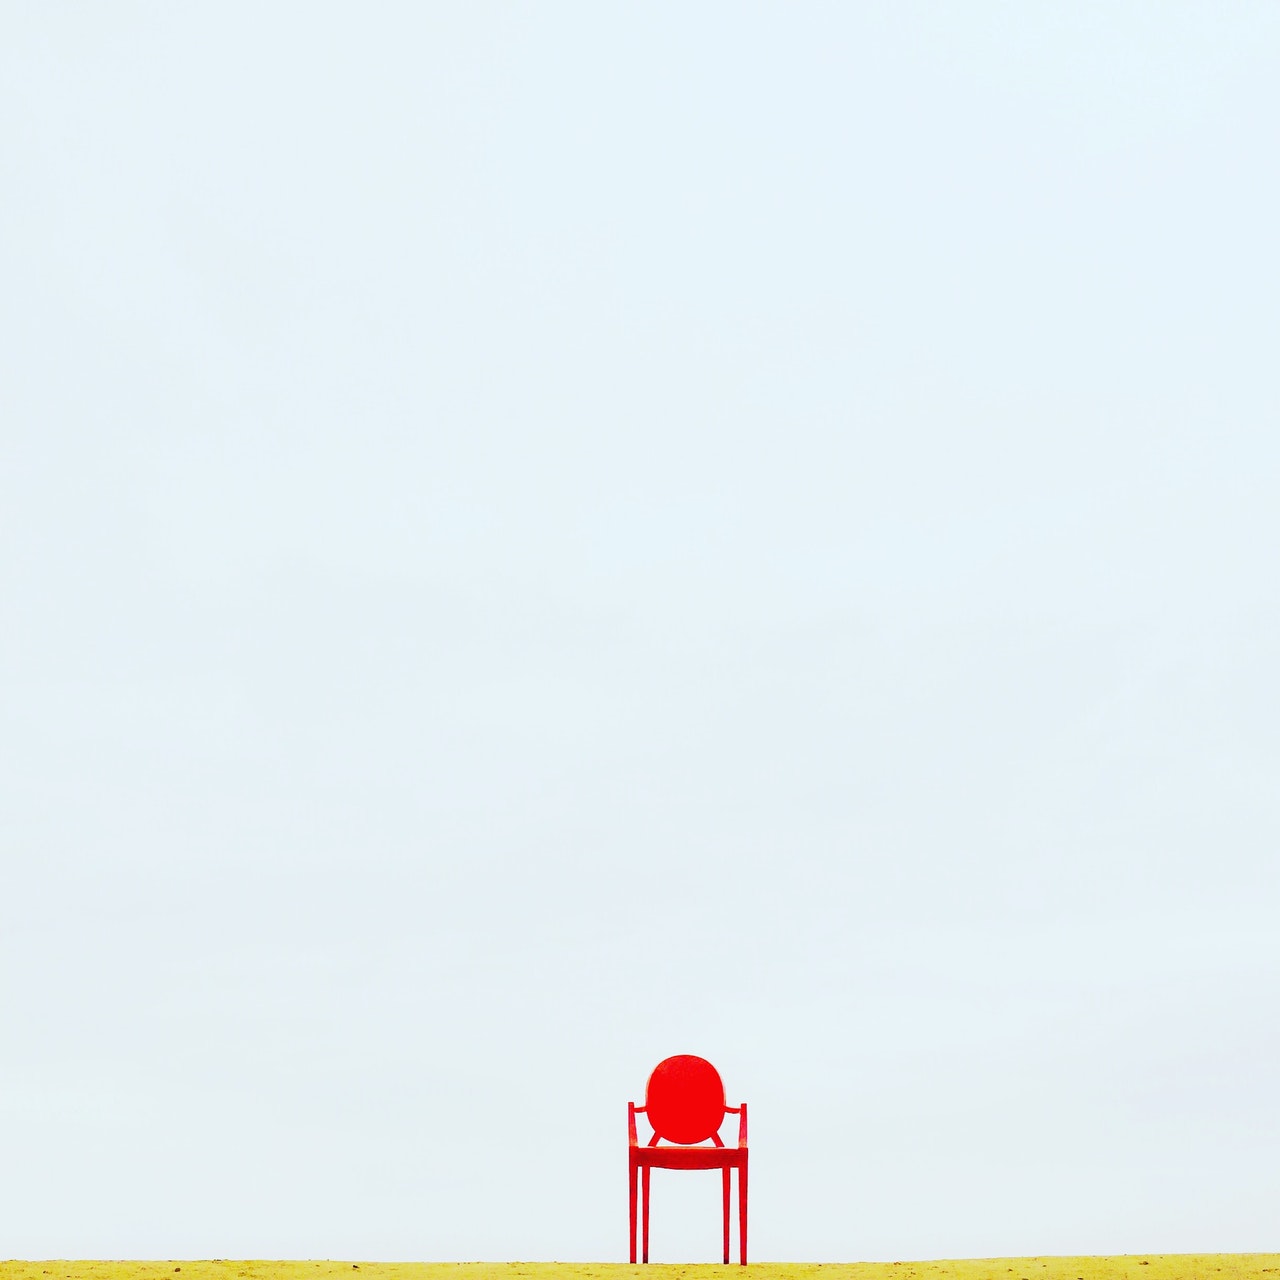 Red Armchair on Brown Surface